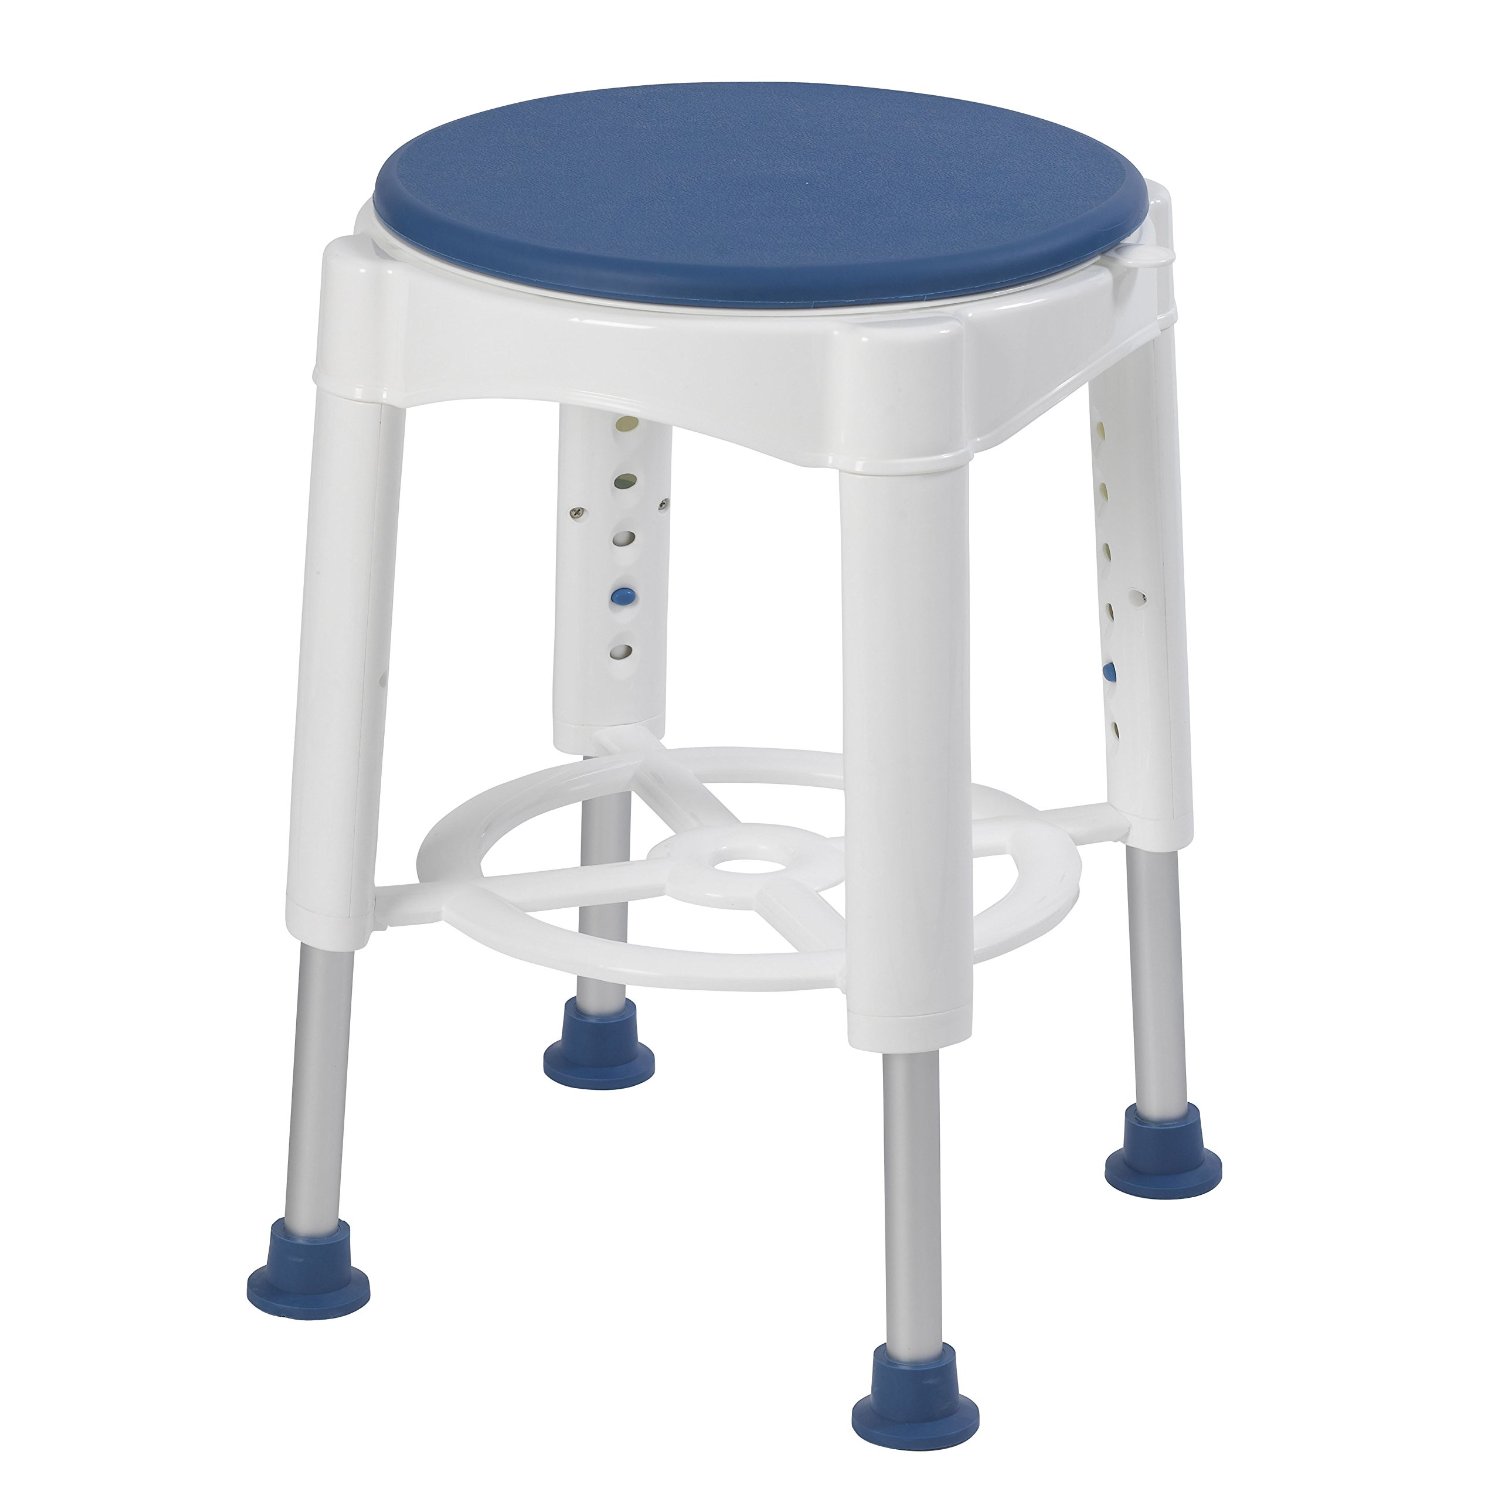 Swivel Seat Shower Stool with removable tray